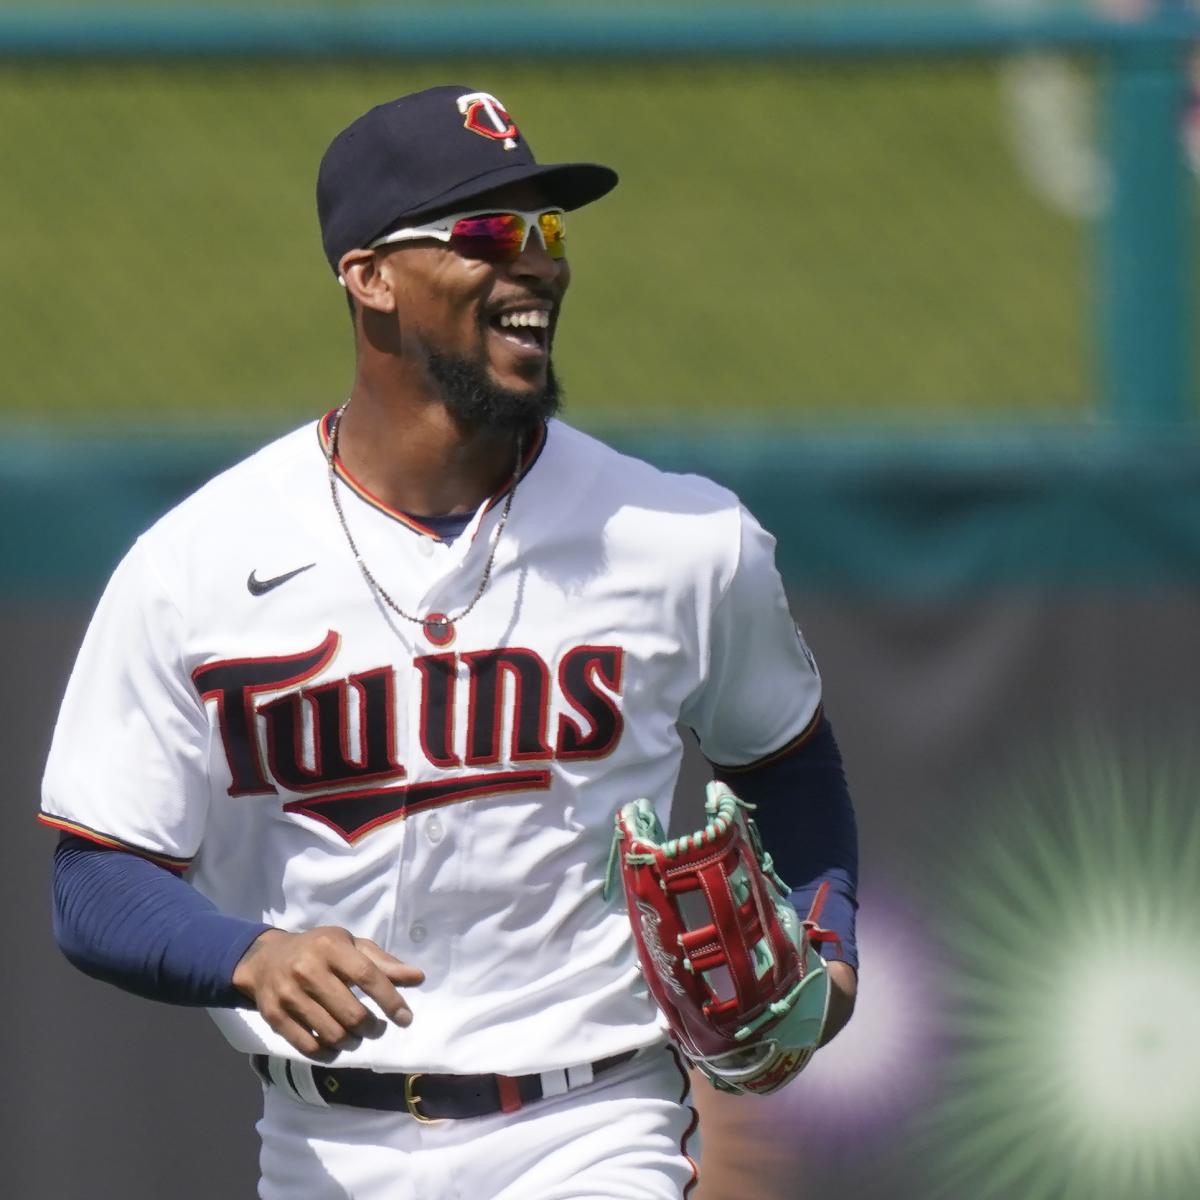 Buxton, Twins relish 'little wins' of crash-free OF plays